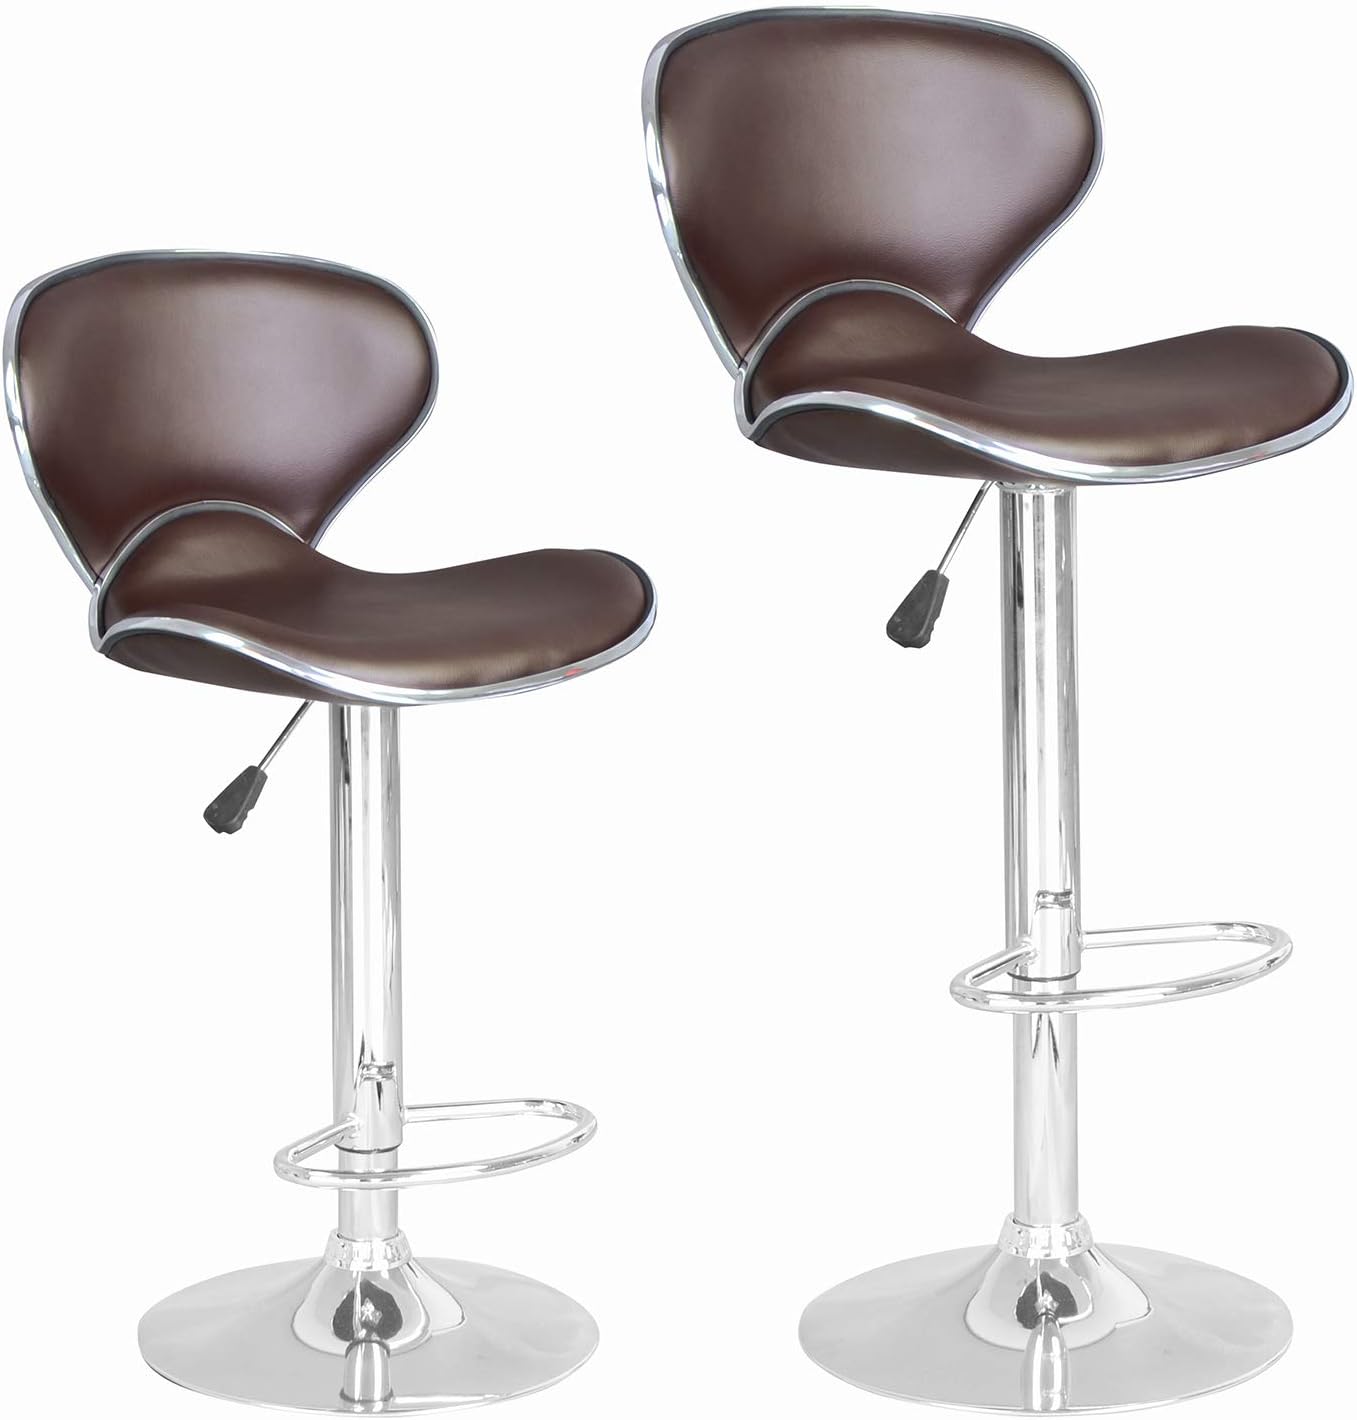 Set of 2 Bar Stools, Counter Height Adjustable Bar Chairs